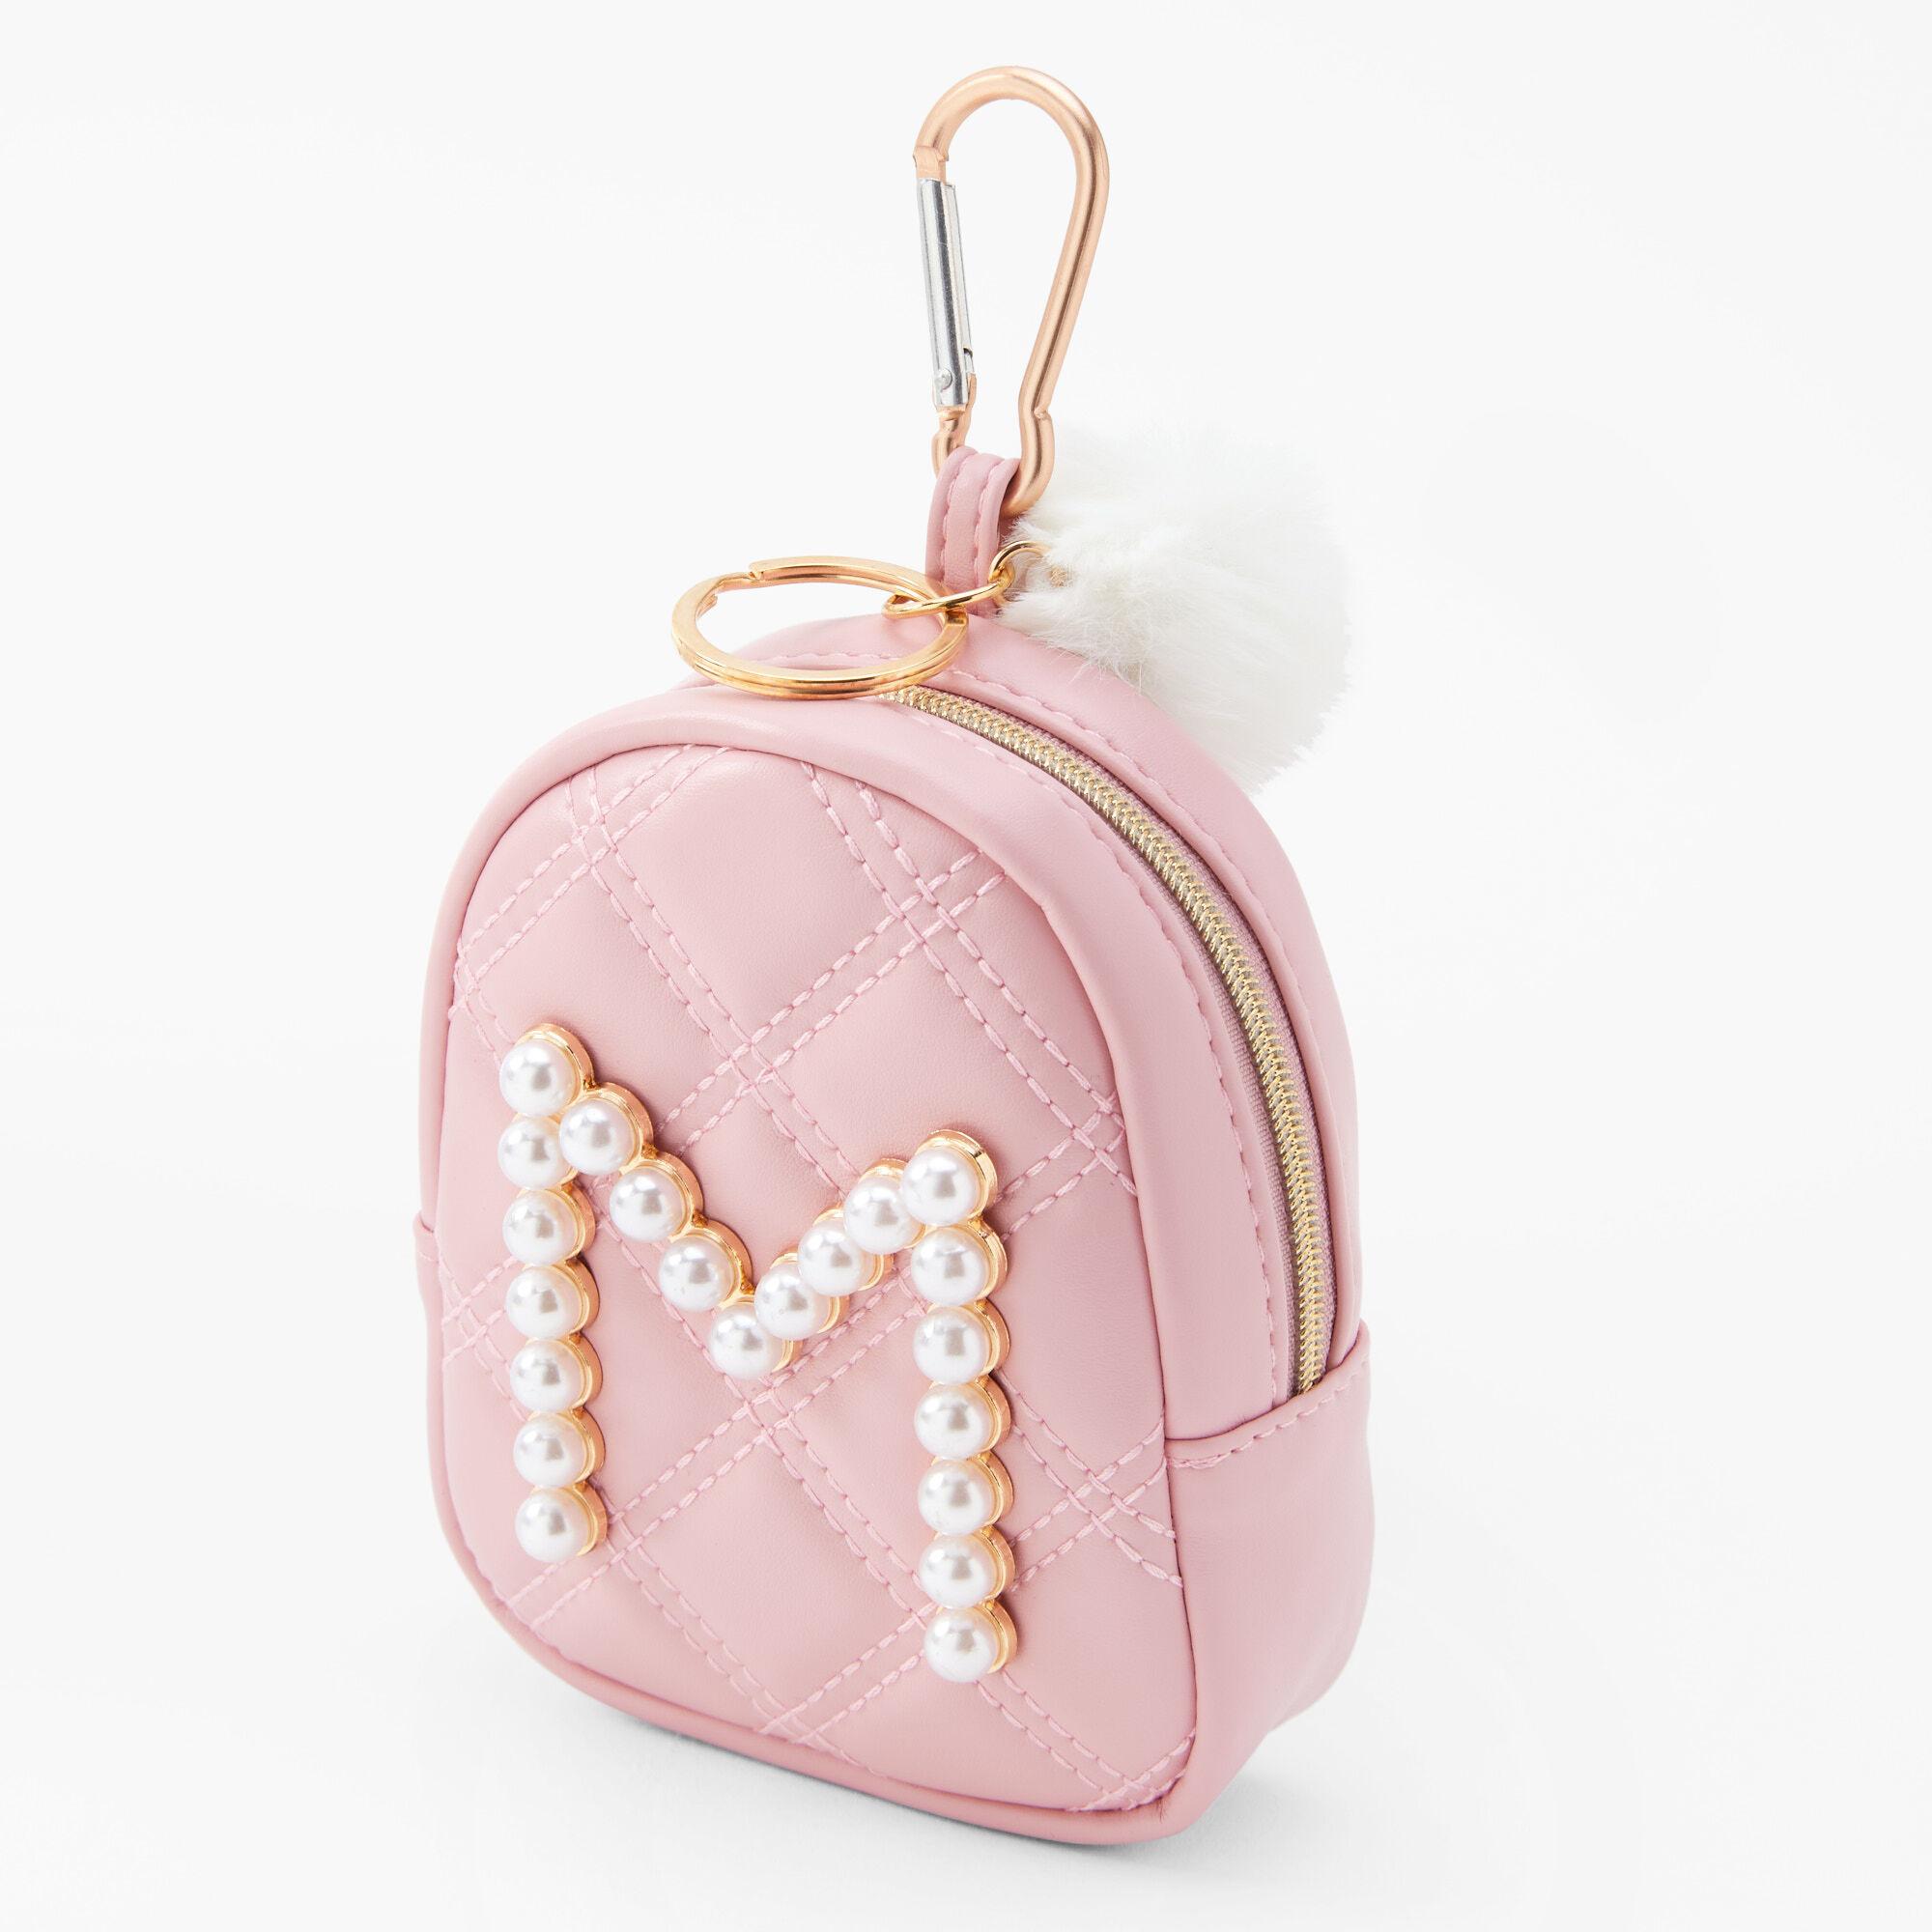  Claire's Pink Quilted Pearl Small Backpack Girls Purse - Cute  Functional Fashion Accessory for Kids Little Girl, Tweens and Teens -  8x5.5x10.5 : Clothing, Shoes & Jewelry